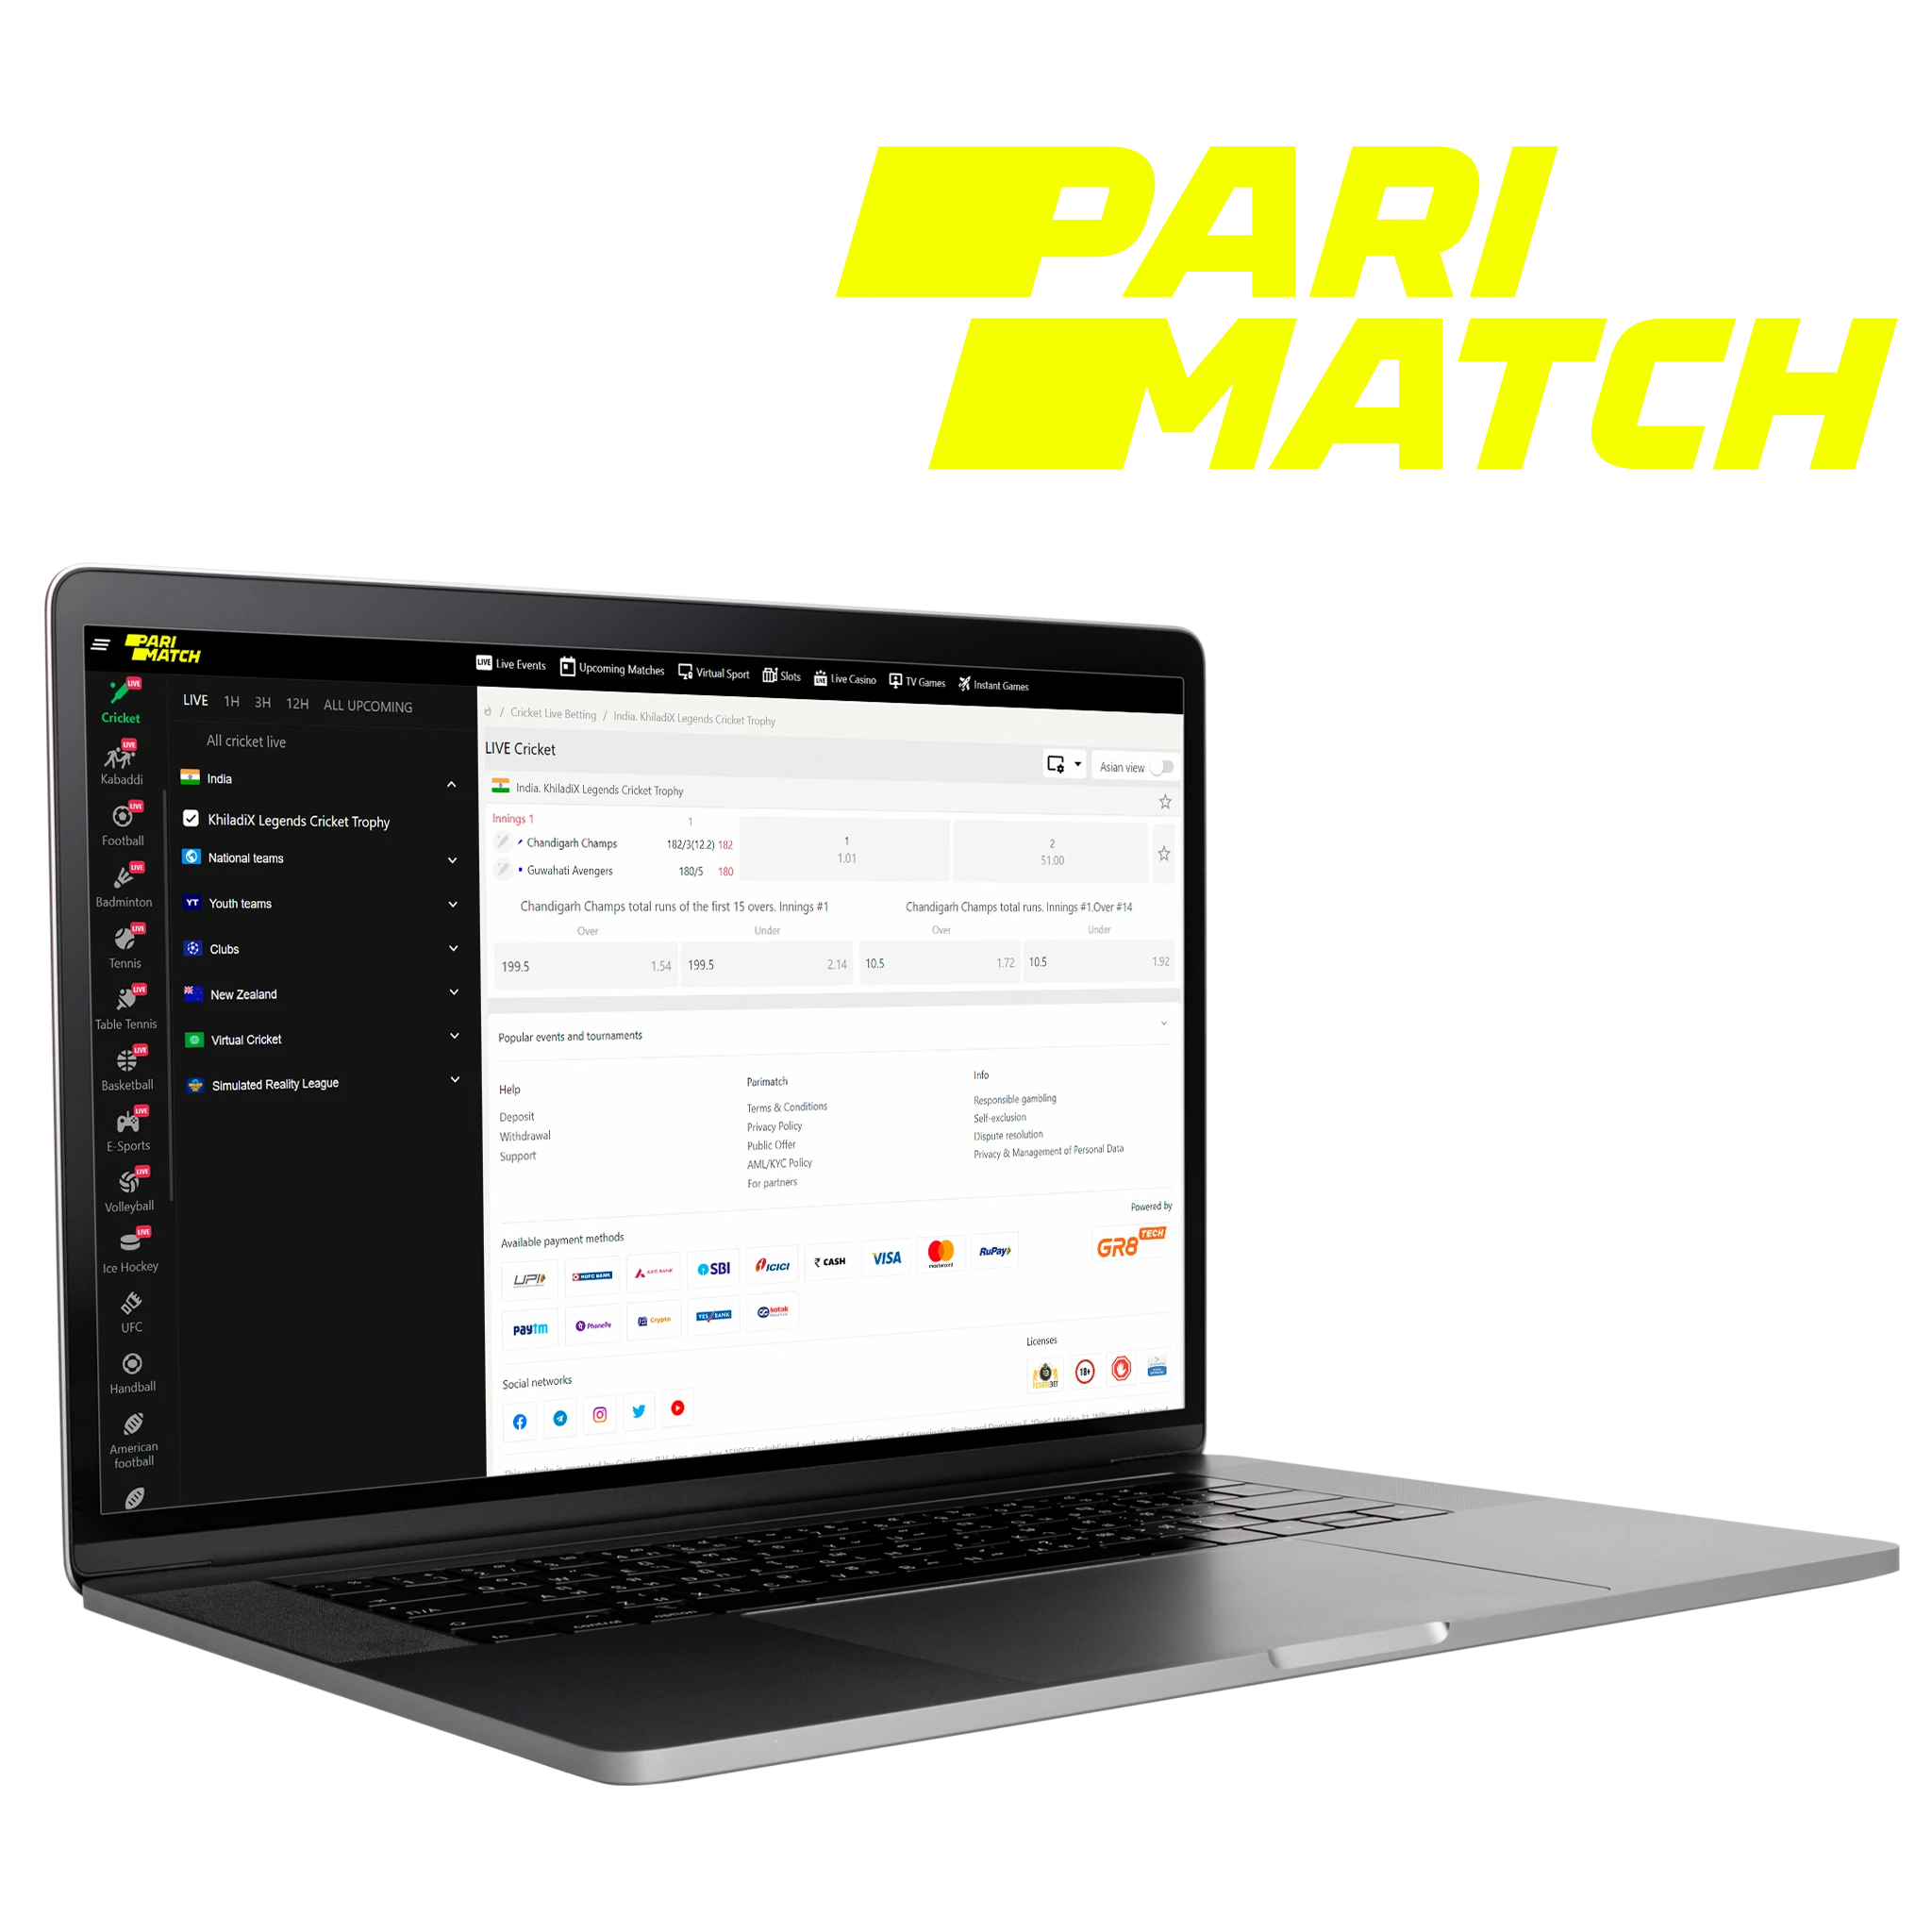 On Parimatch, you can easily place a bet on any cricket event.